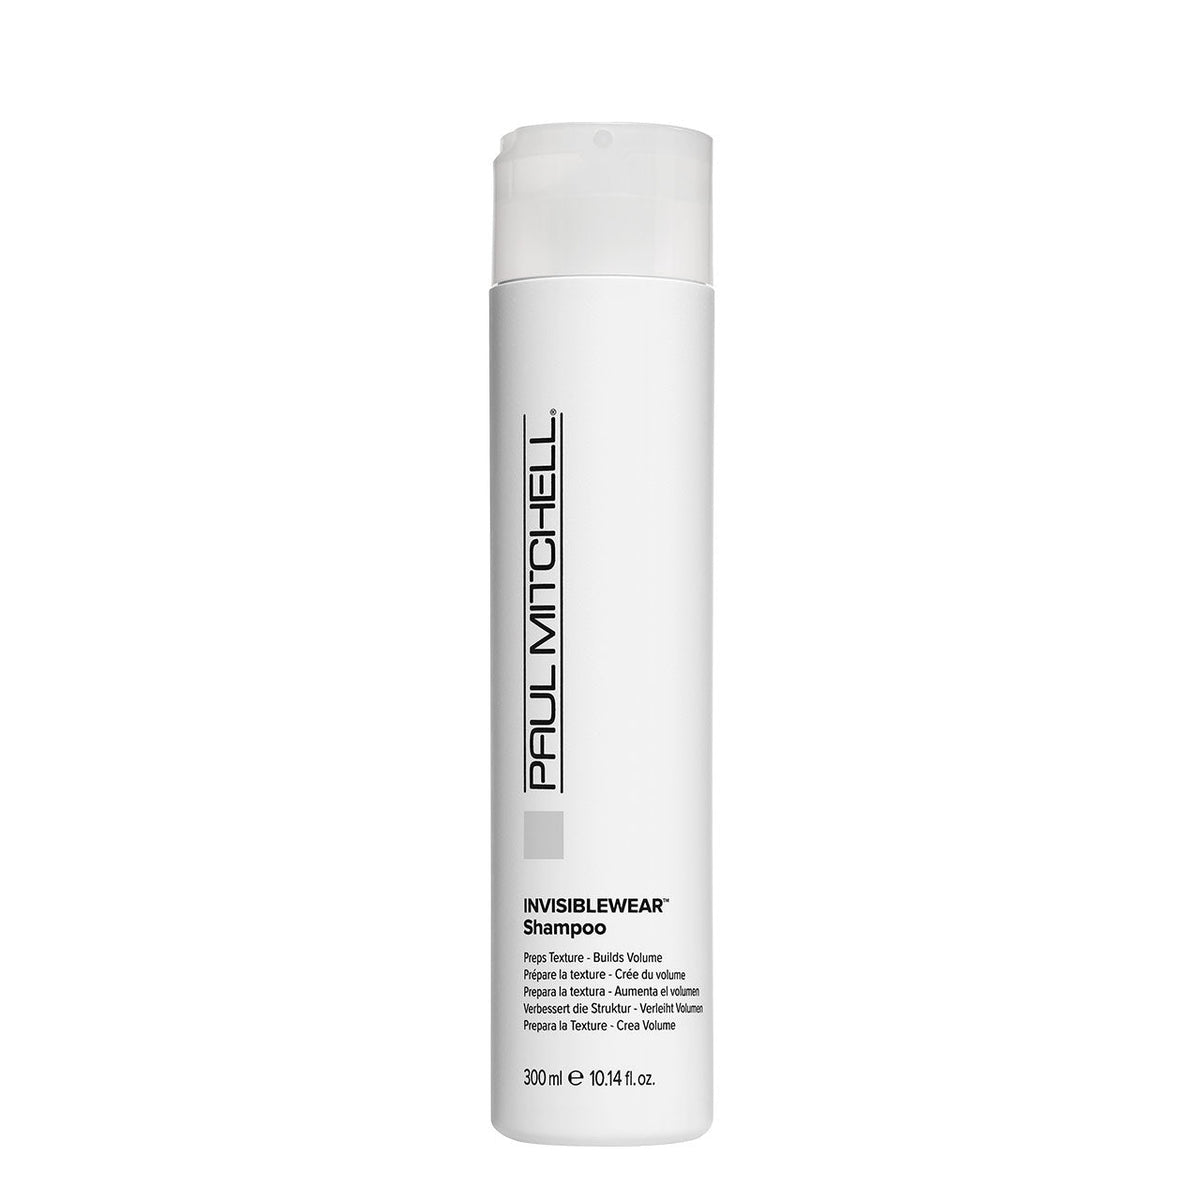 Invisiblewear Shampoo - 300ML - by Paul Mitchell |ProCare Outlet|